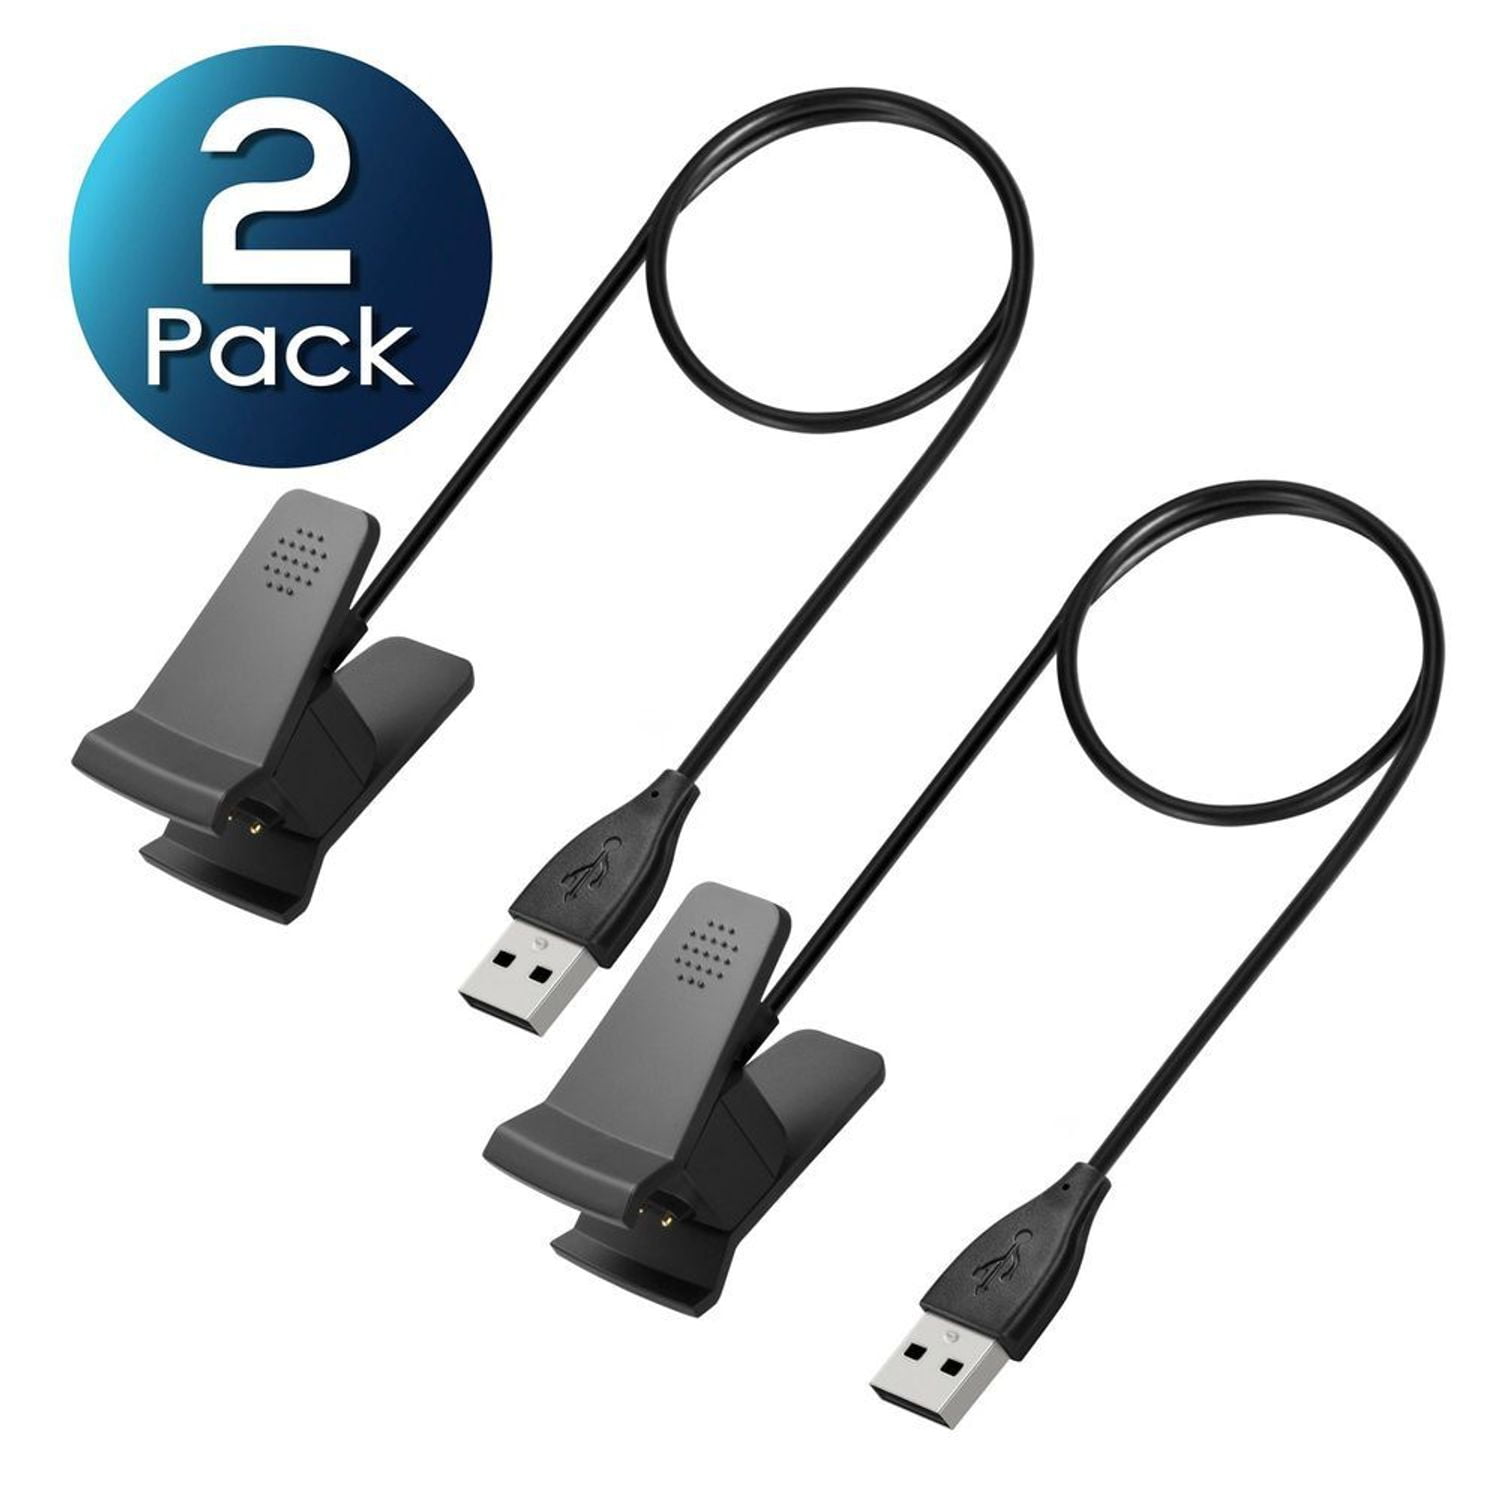 2x Good USB Charging Cable Cord Charger For Fitbit Flex 2 Bracelet Wristband USA 